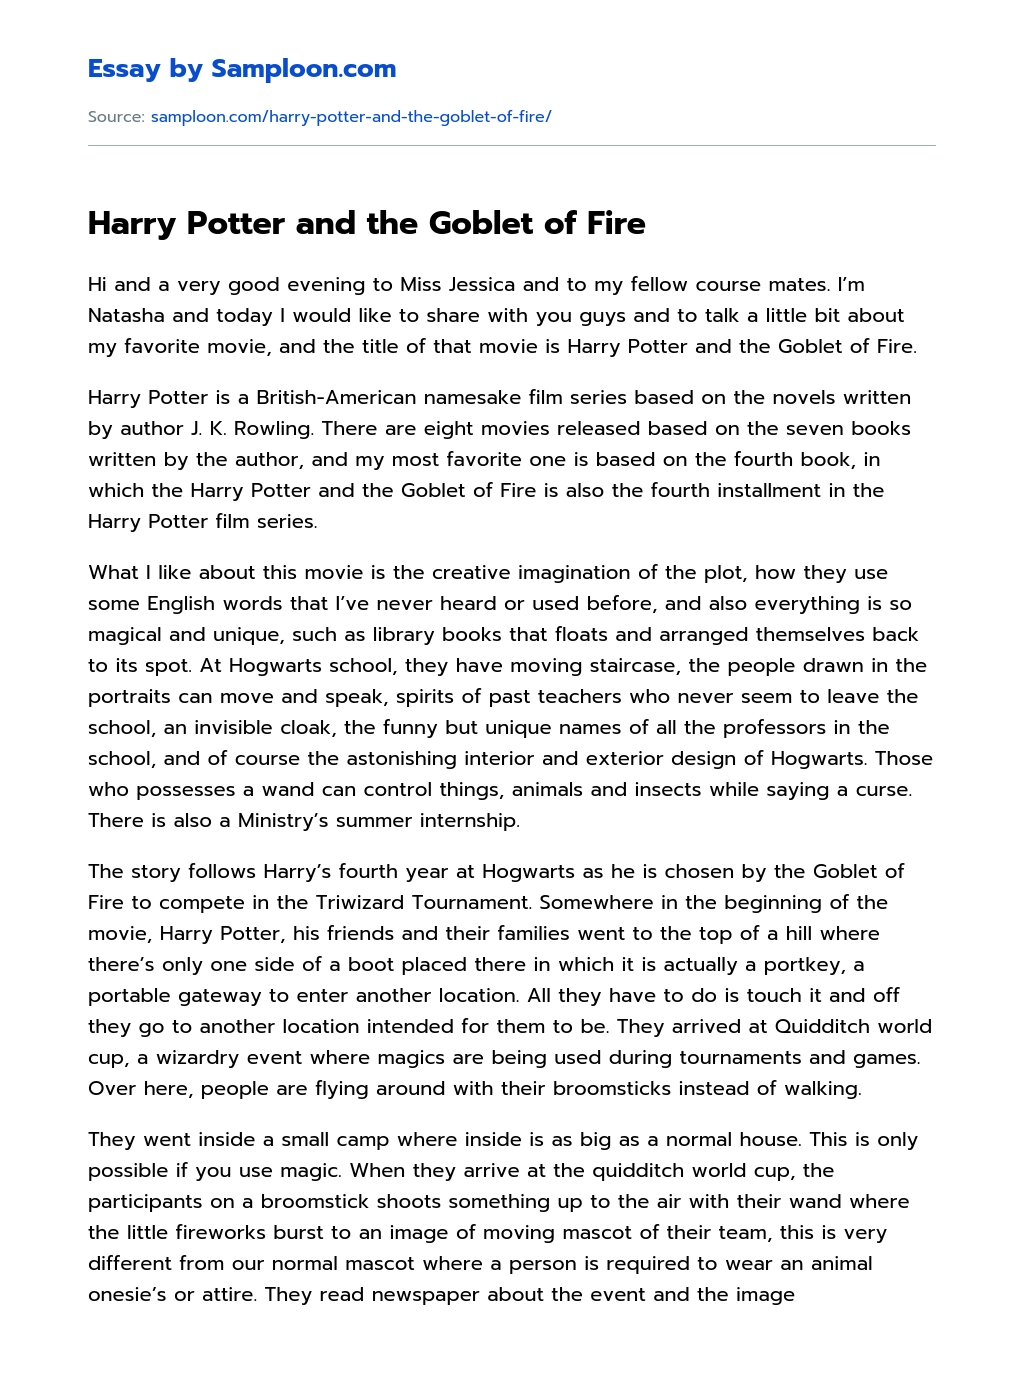 Harry Potter and the Goblet of Fire Book Review essay